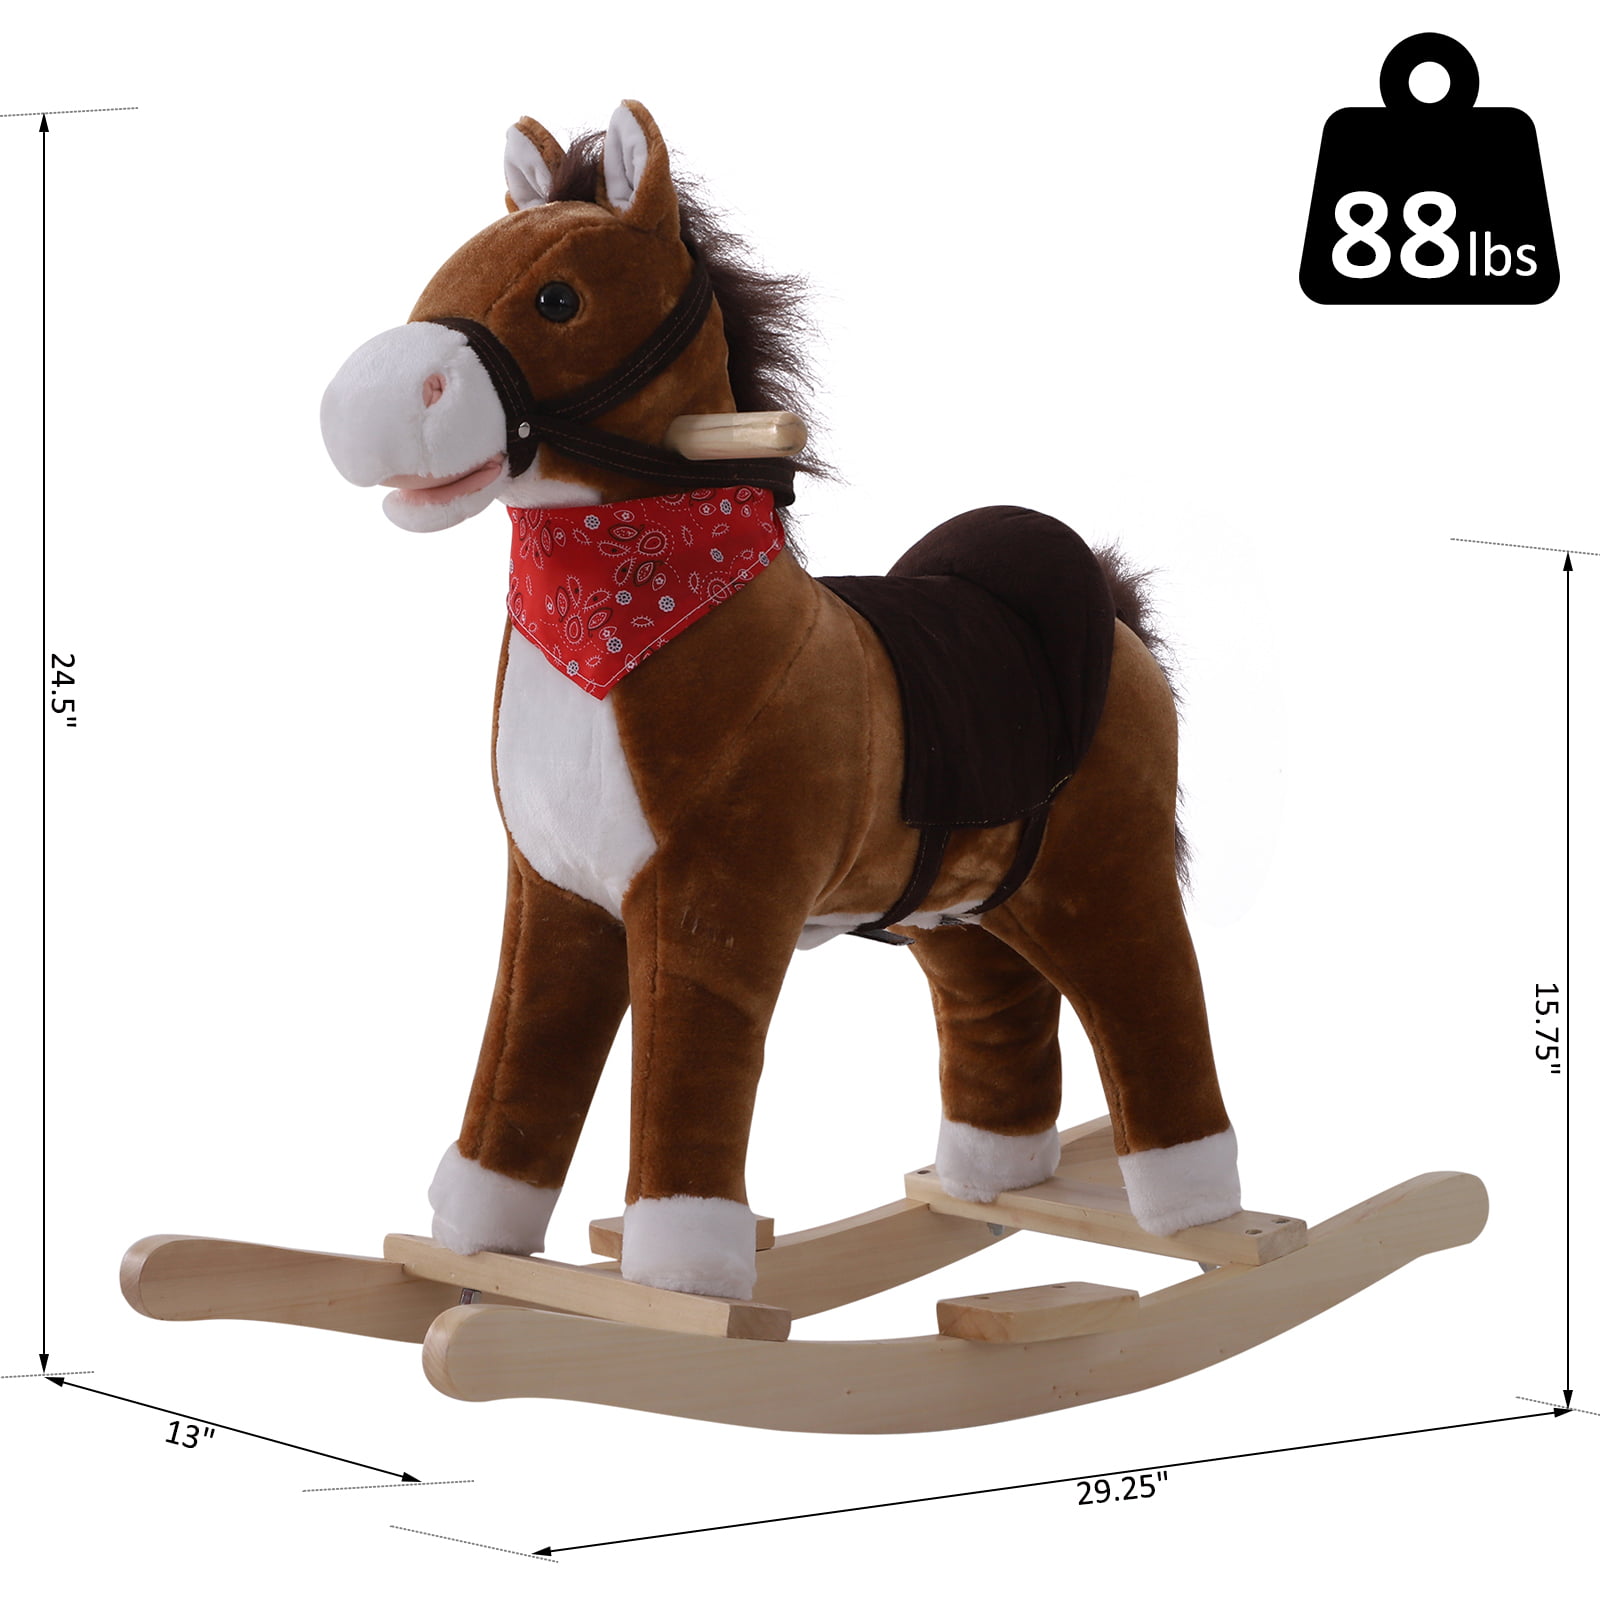 Kids Ride On Rocking Horse Pony Red Scarf Toy Plush Gift with Moving Tail 